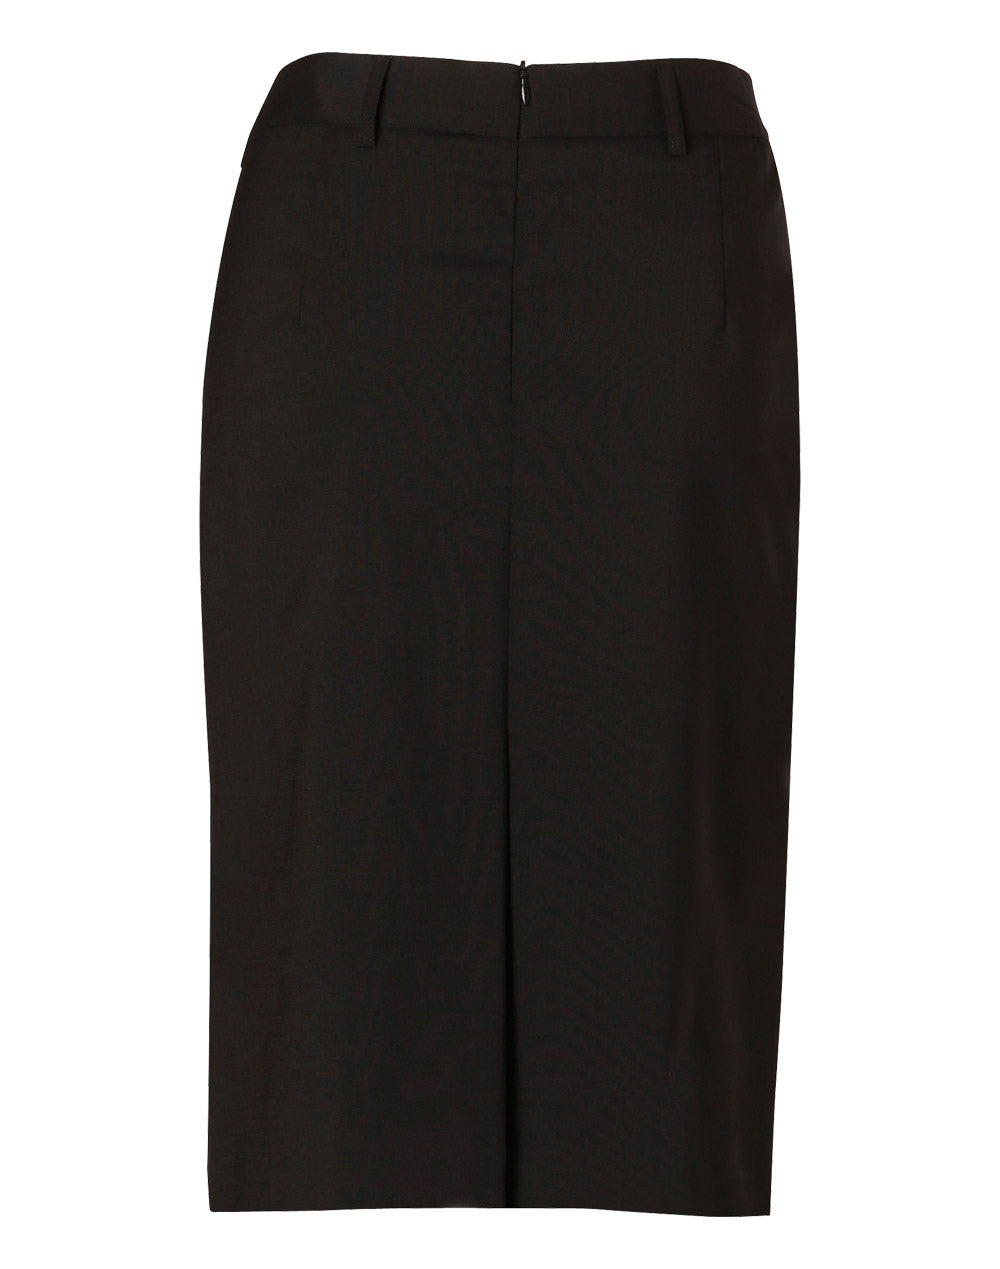 M9470 Women's Wool Blend Stretch Mid Length Lined Pencil Skirt